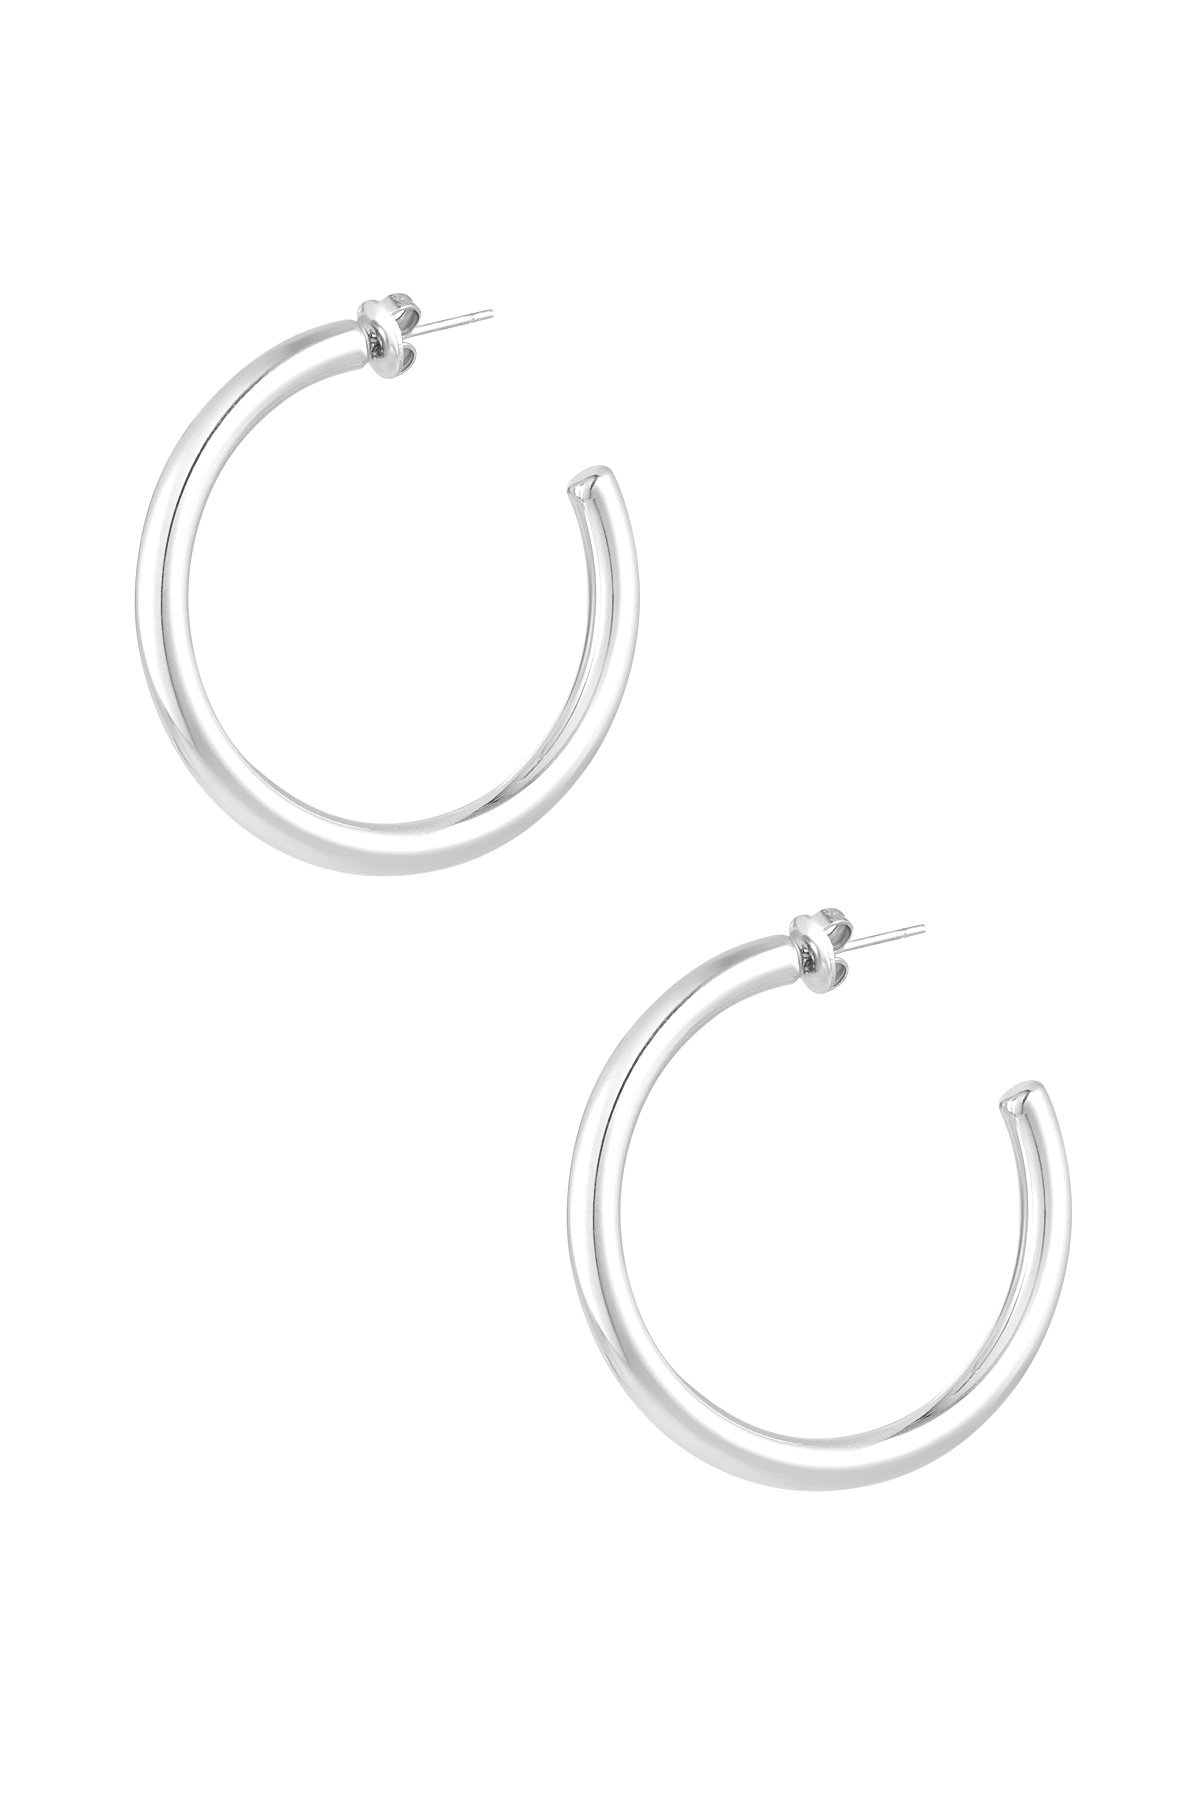 Earrings thick basic - silver h5 